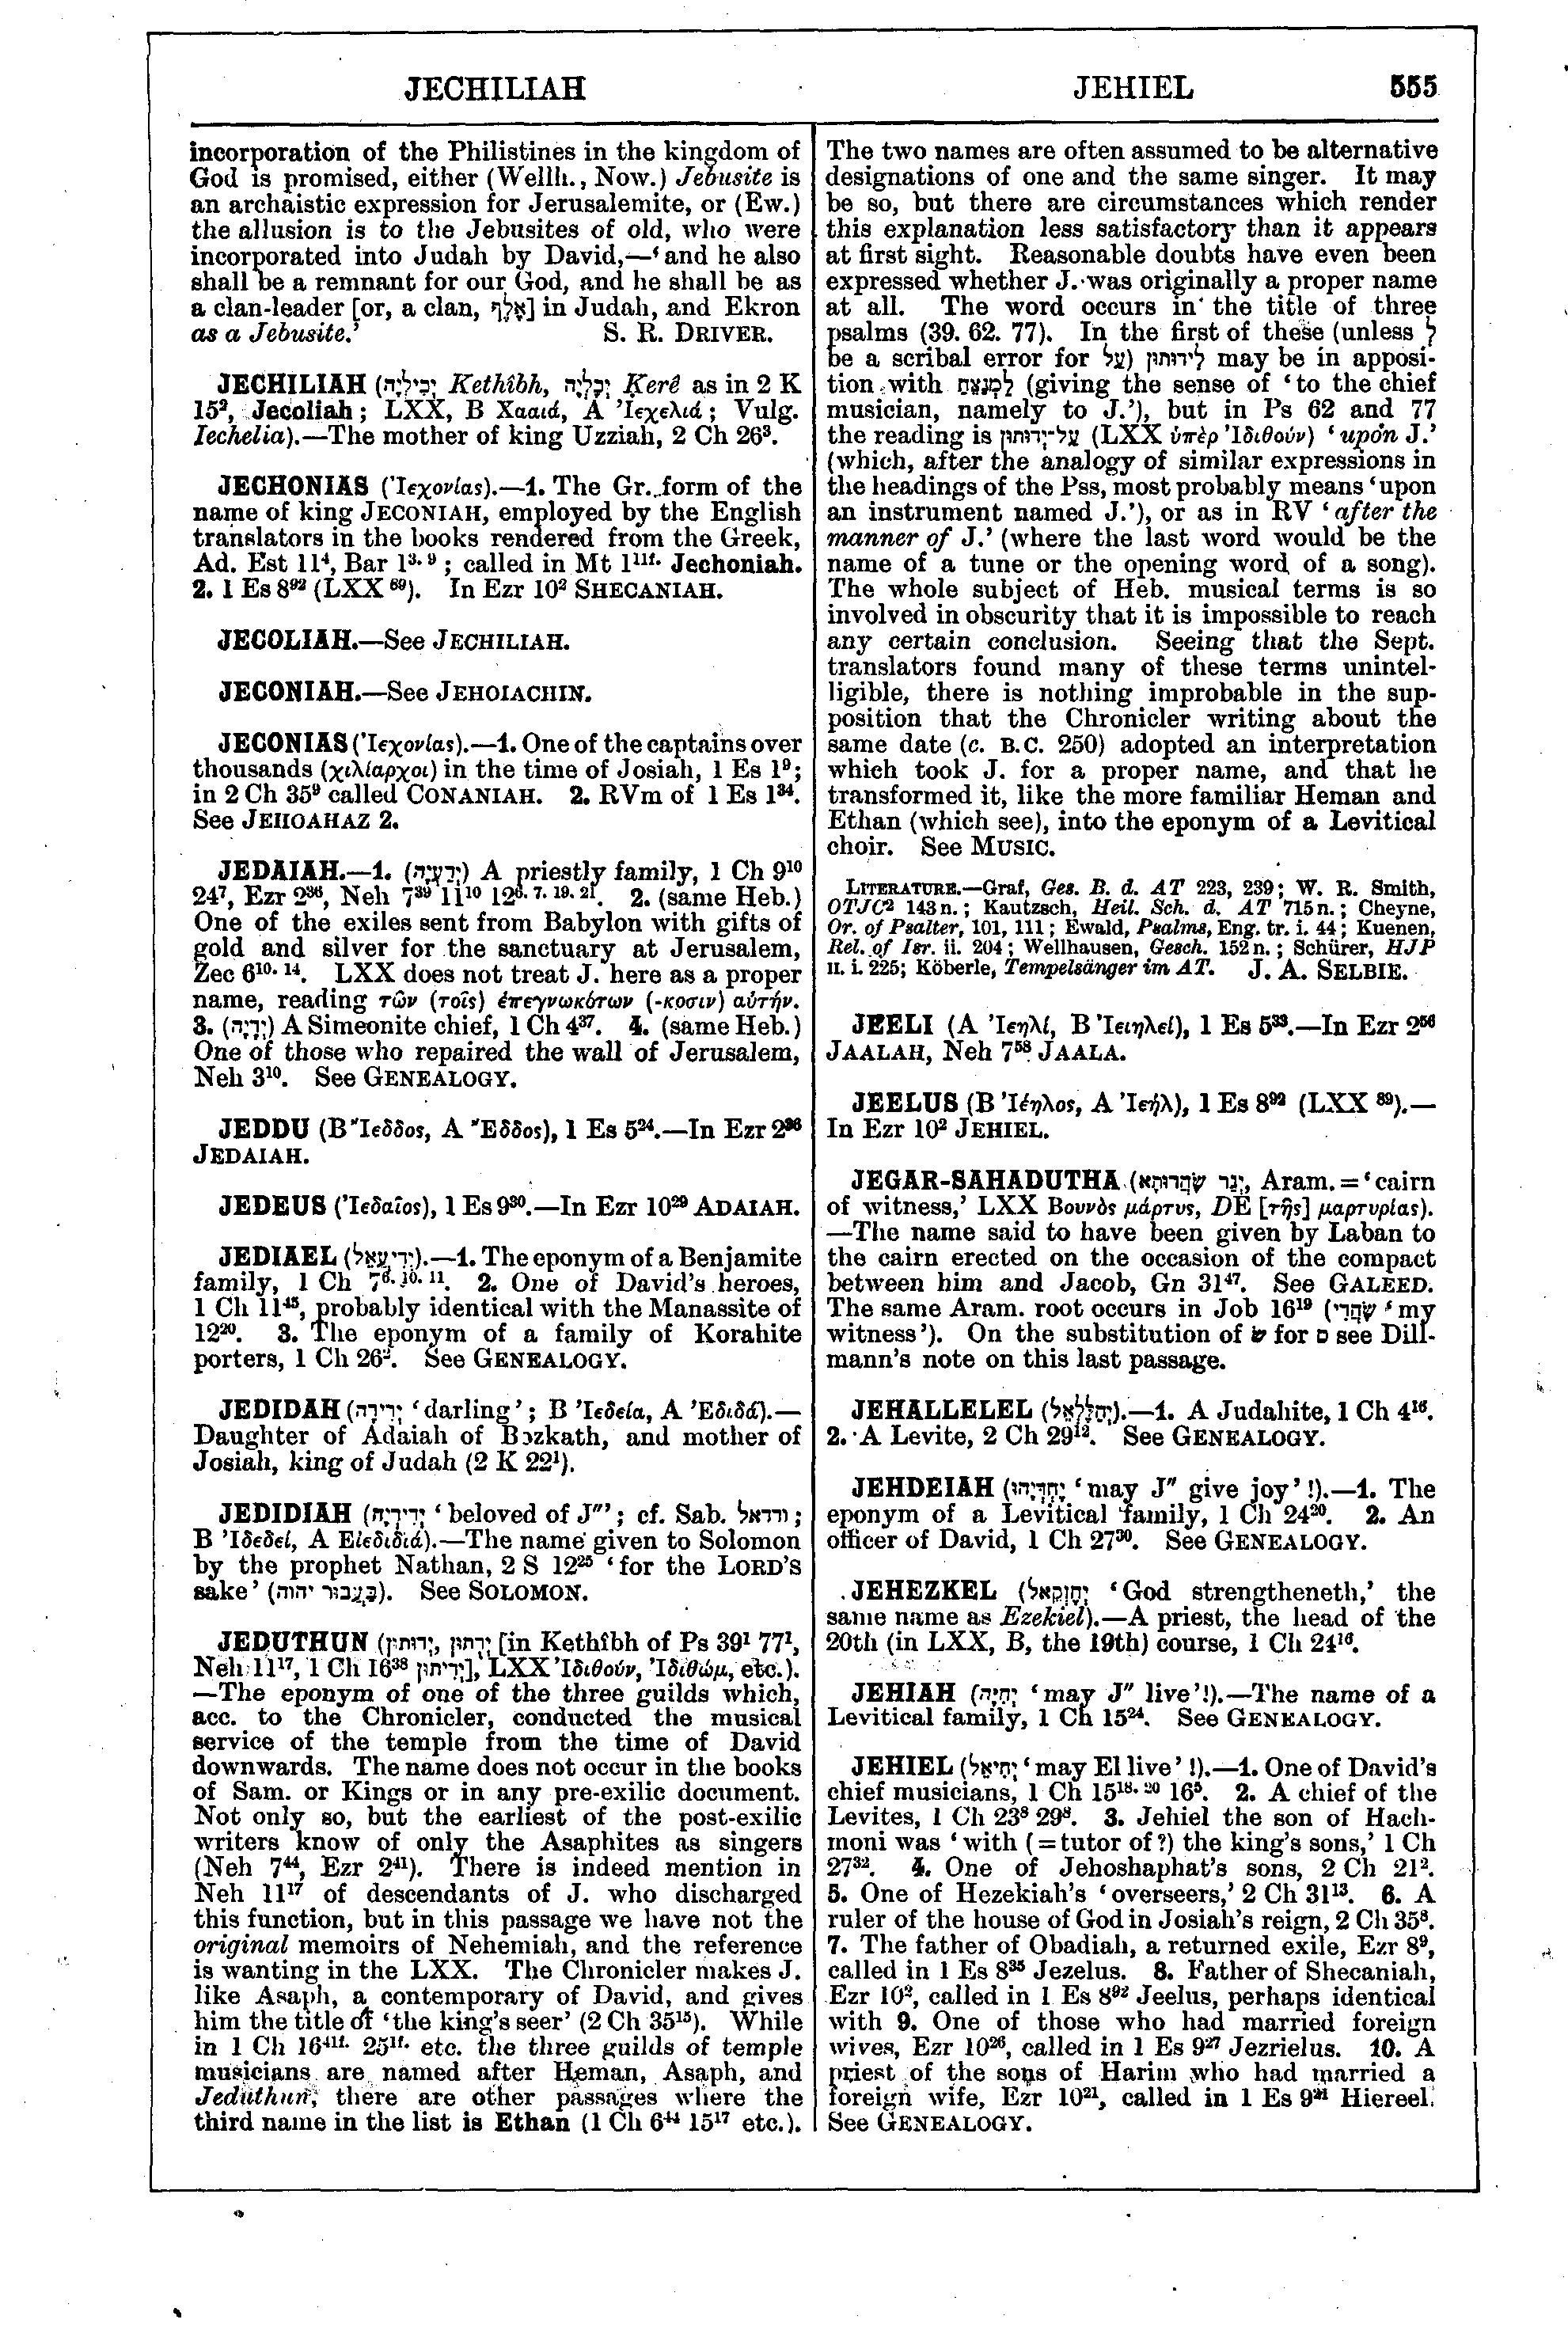 Image of page 555